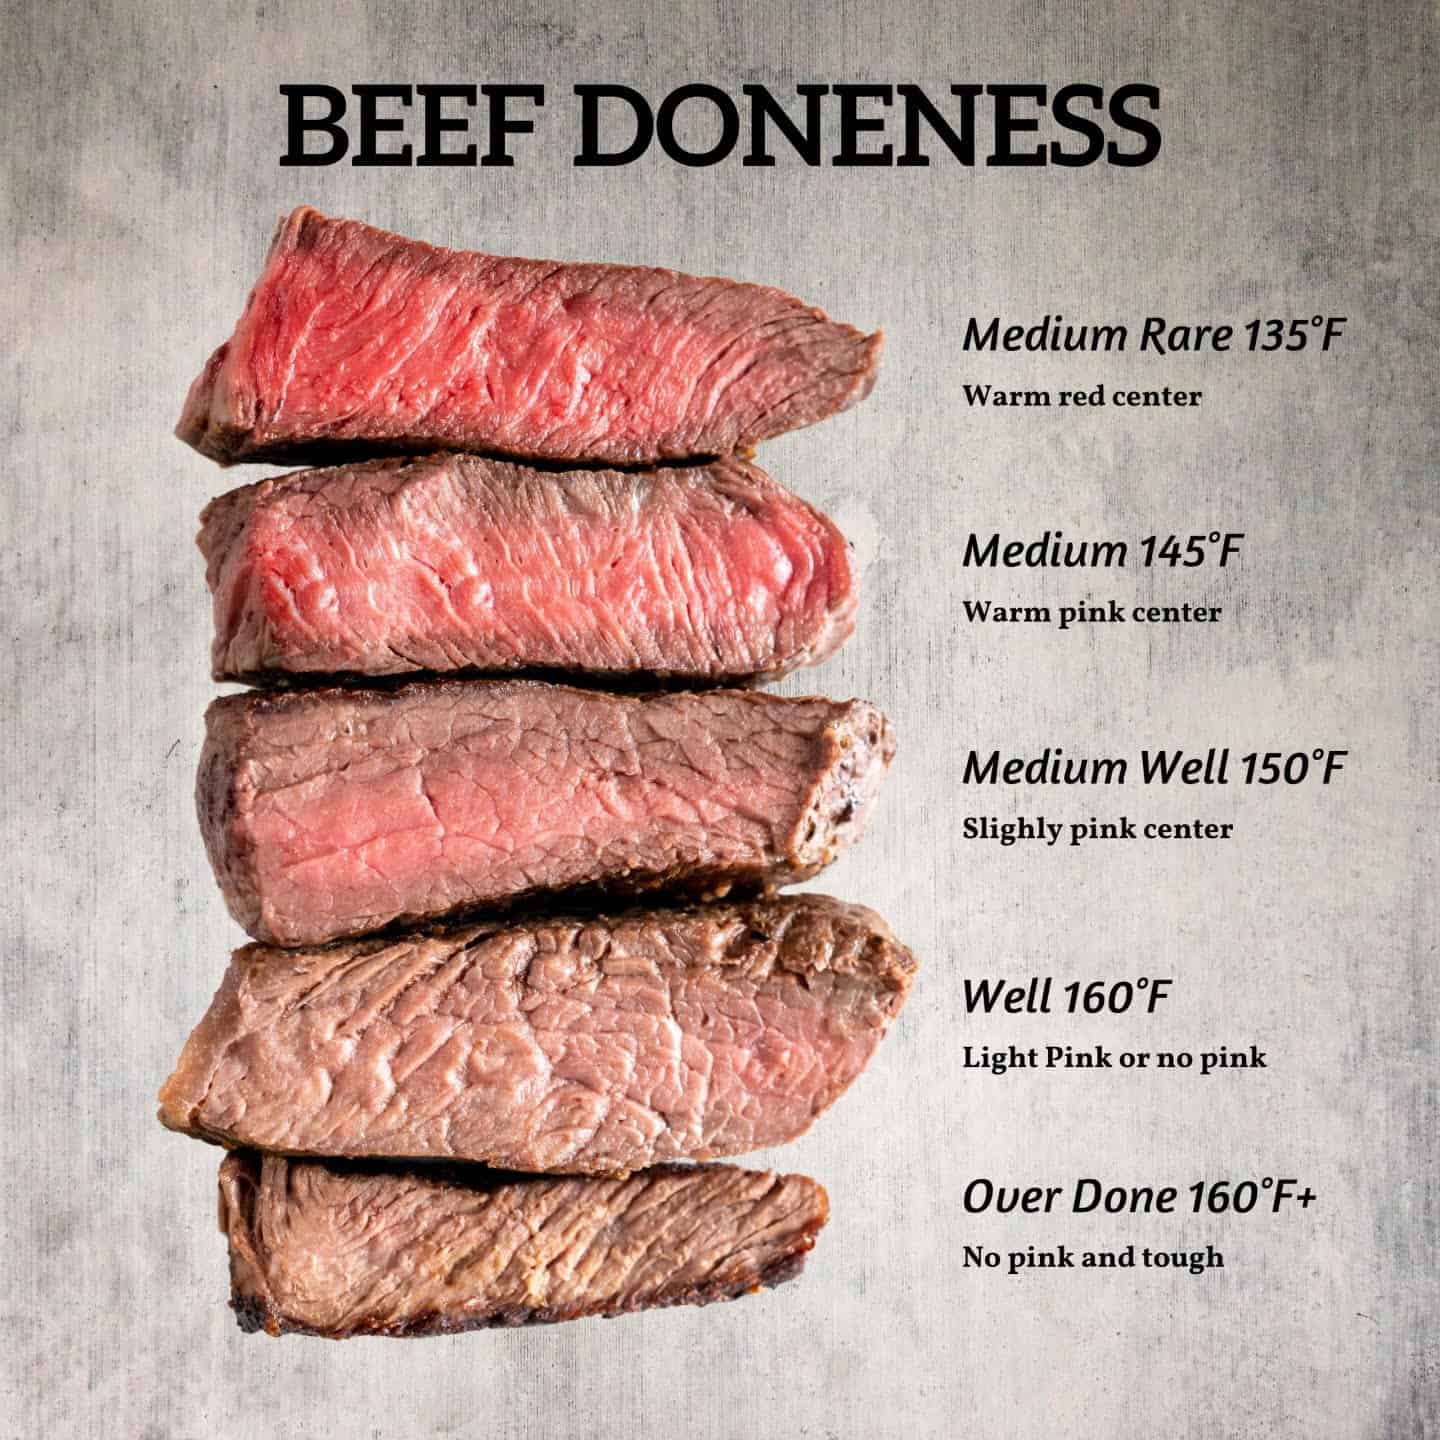 Beef doneness chart with medium-rare, medium, medium-well, well, and over-done.